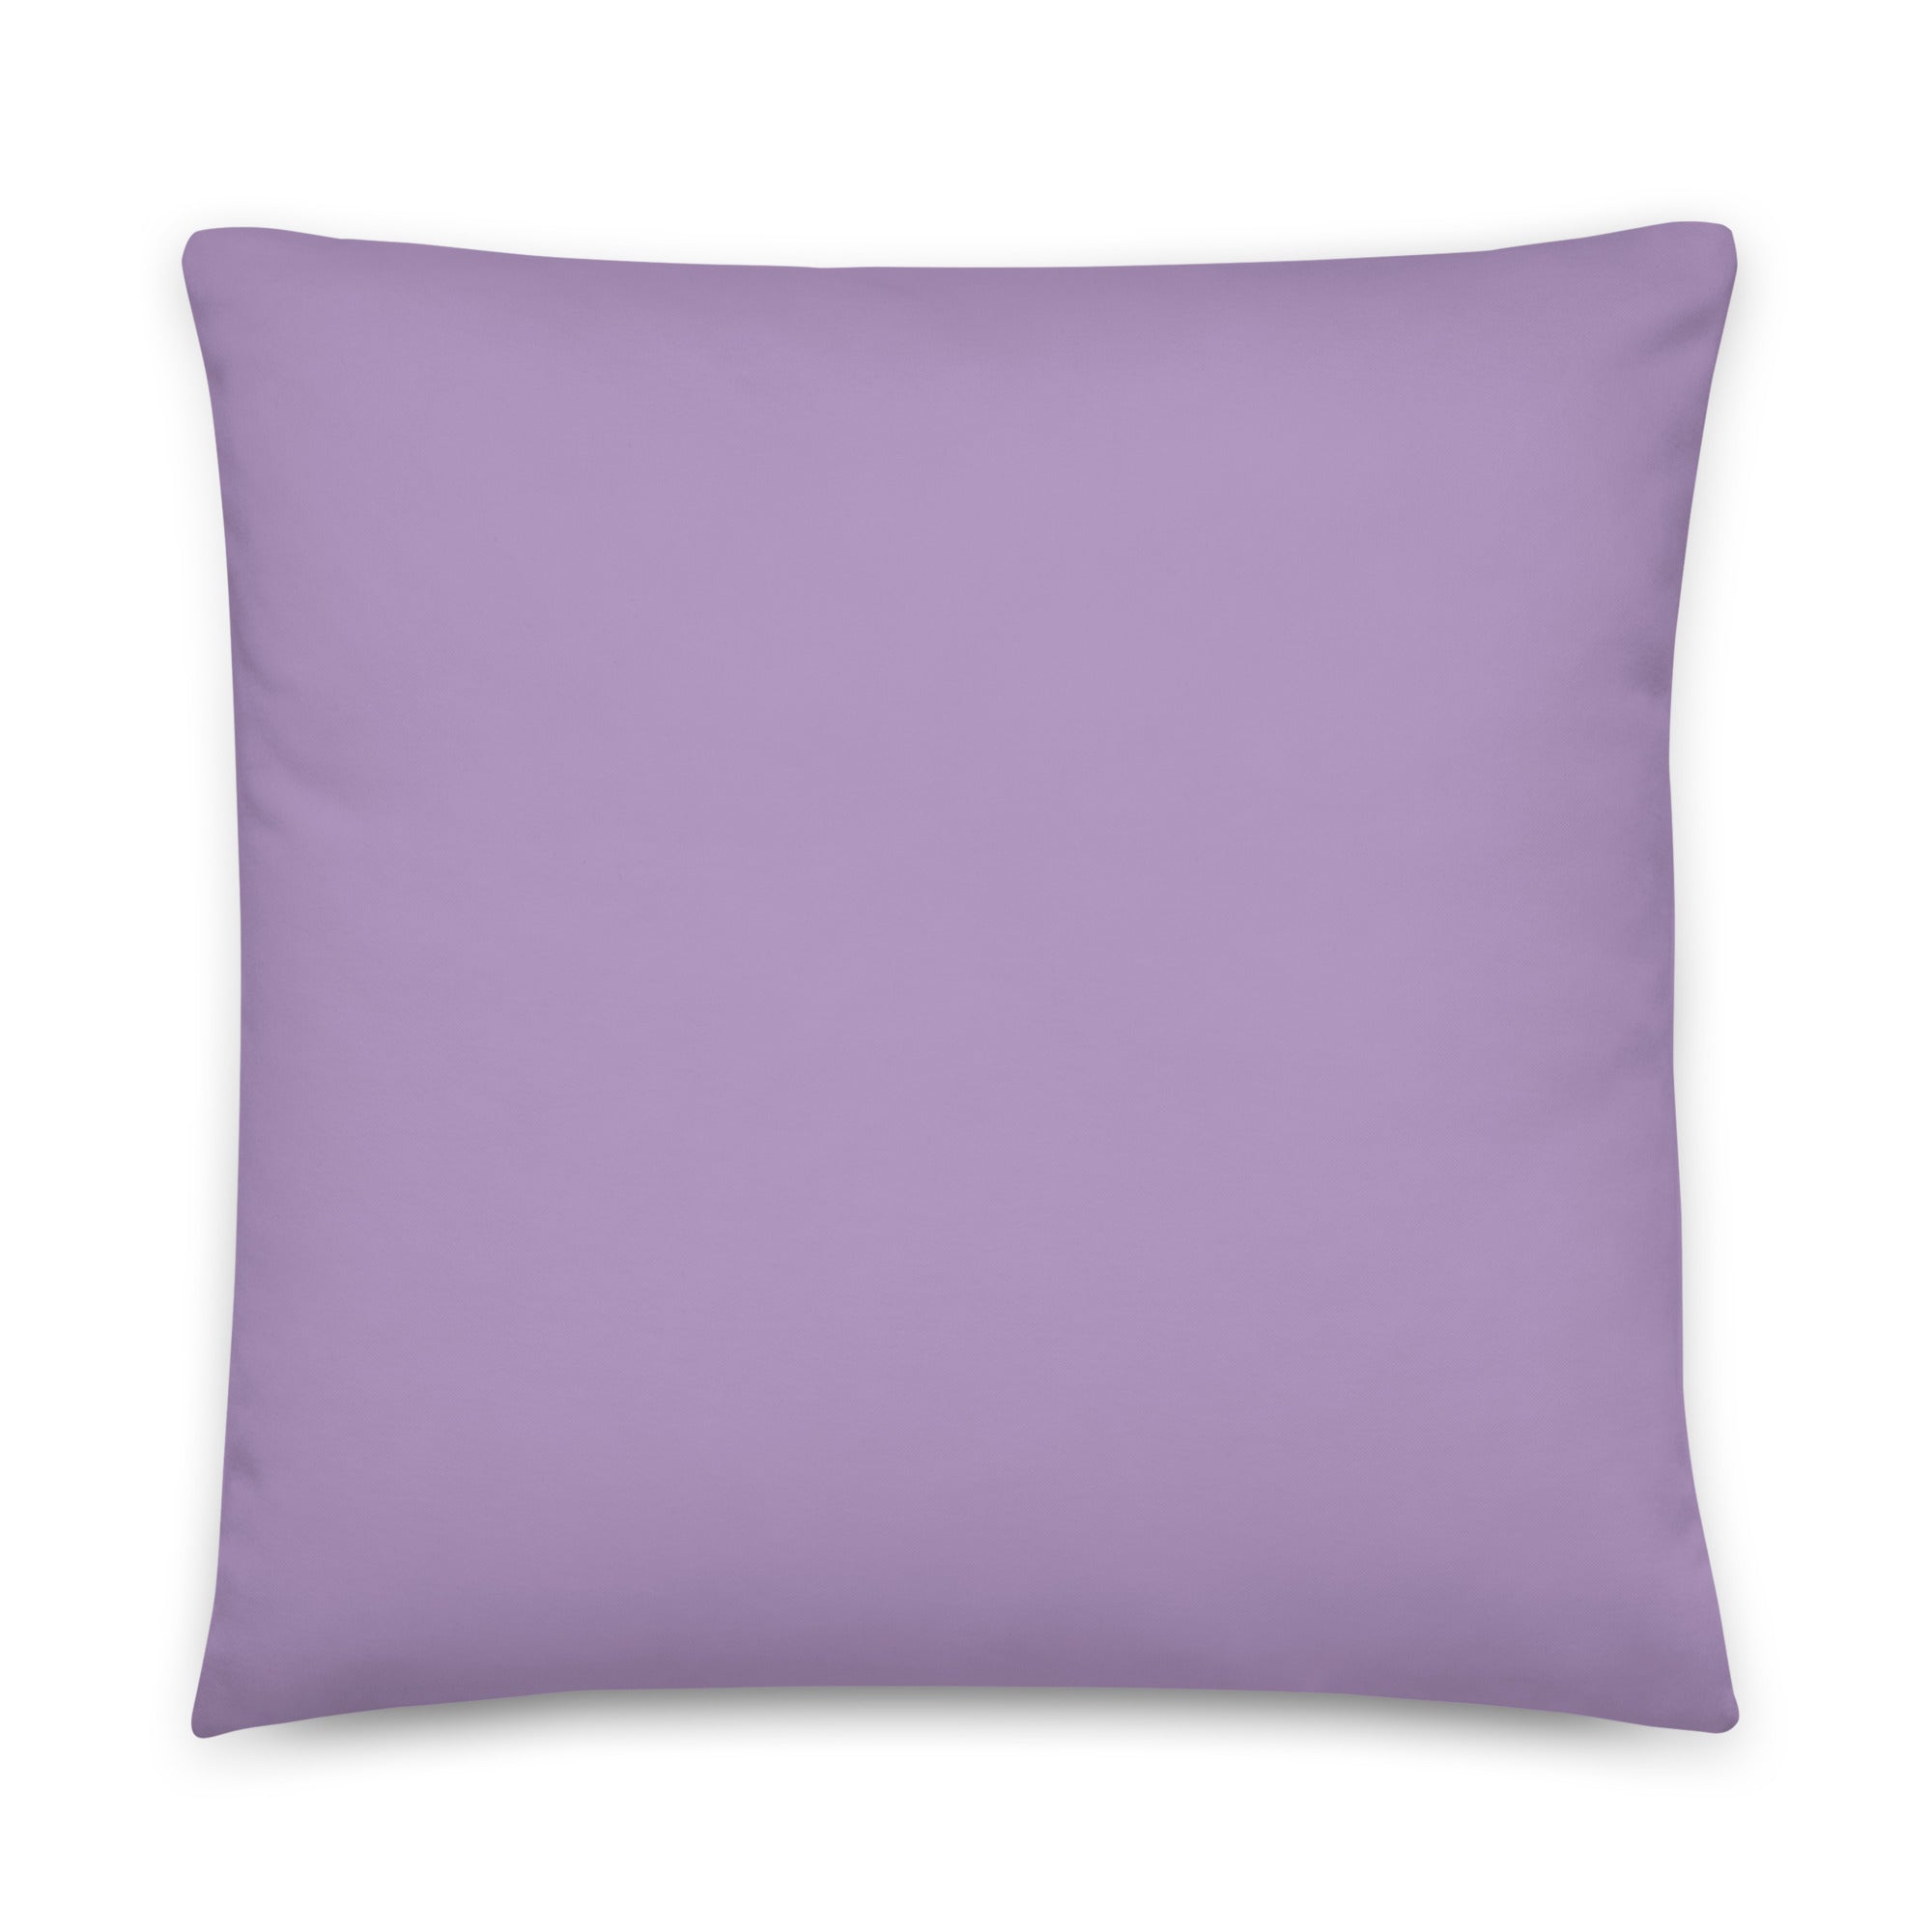 Whether you're looking to enhance your living room, bedroom, or even a cozy reading nook, the Purple Butterfly Girl Cushion Cover is sure to captivate with its enchanting design and bring a touch of nature's beauty into your home.